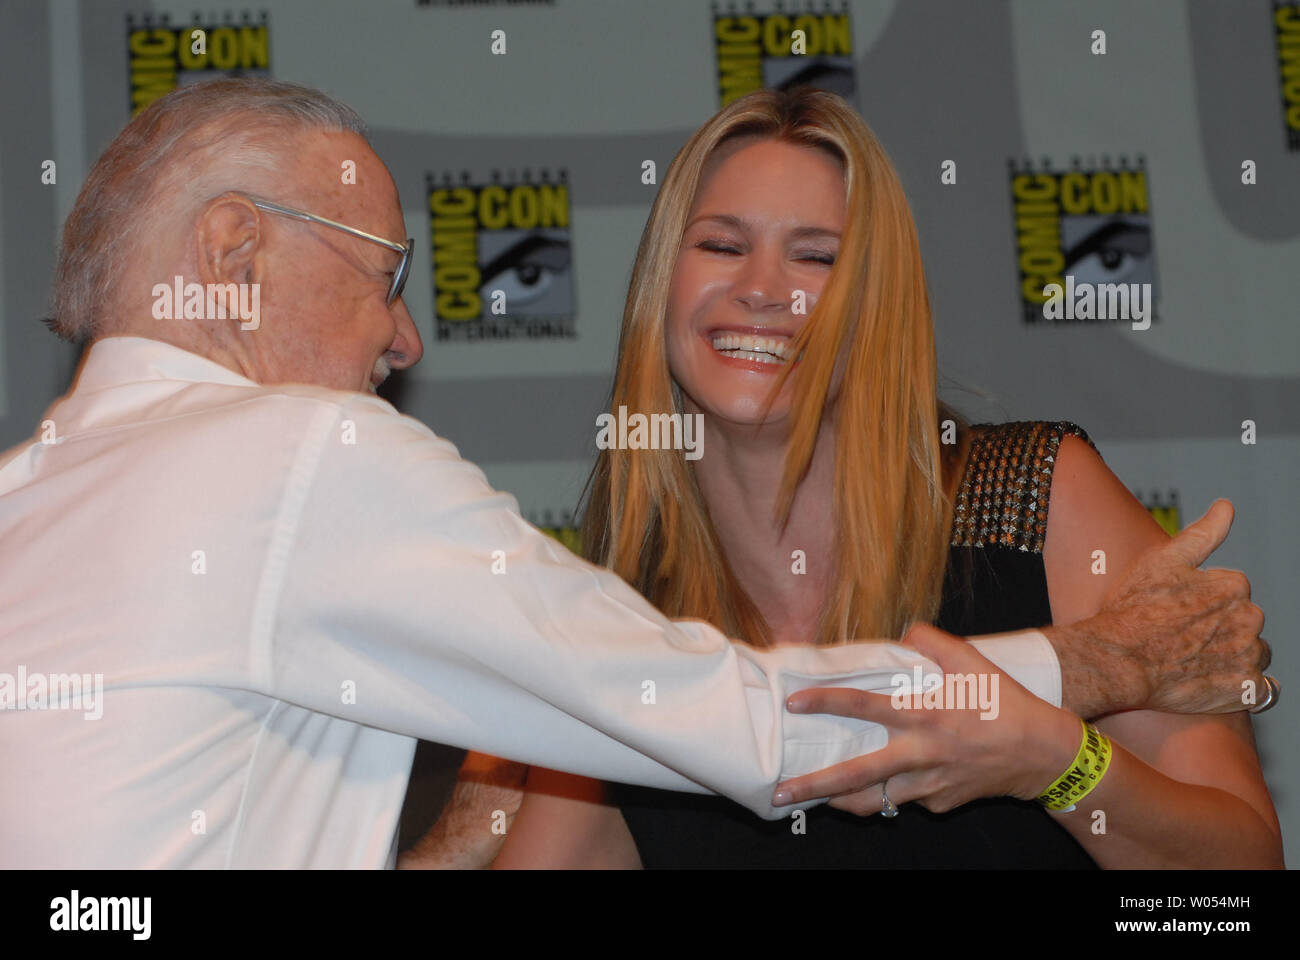 Comics creator Stan Lee greets actress Natasha Henstridge at the 40th annual Comic-Con International, the largest comic book and pop culture event in North America, at the San Diego Convention Center on July 23, 2009. (UPI Photo/Earl Cryer) Stock Photo